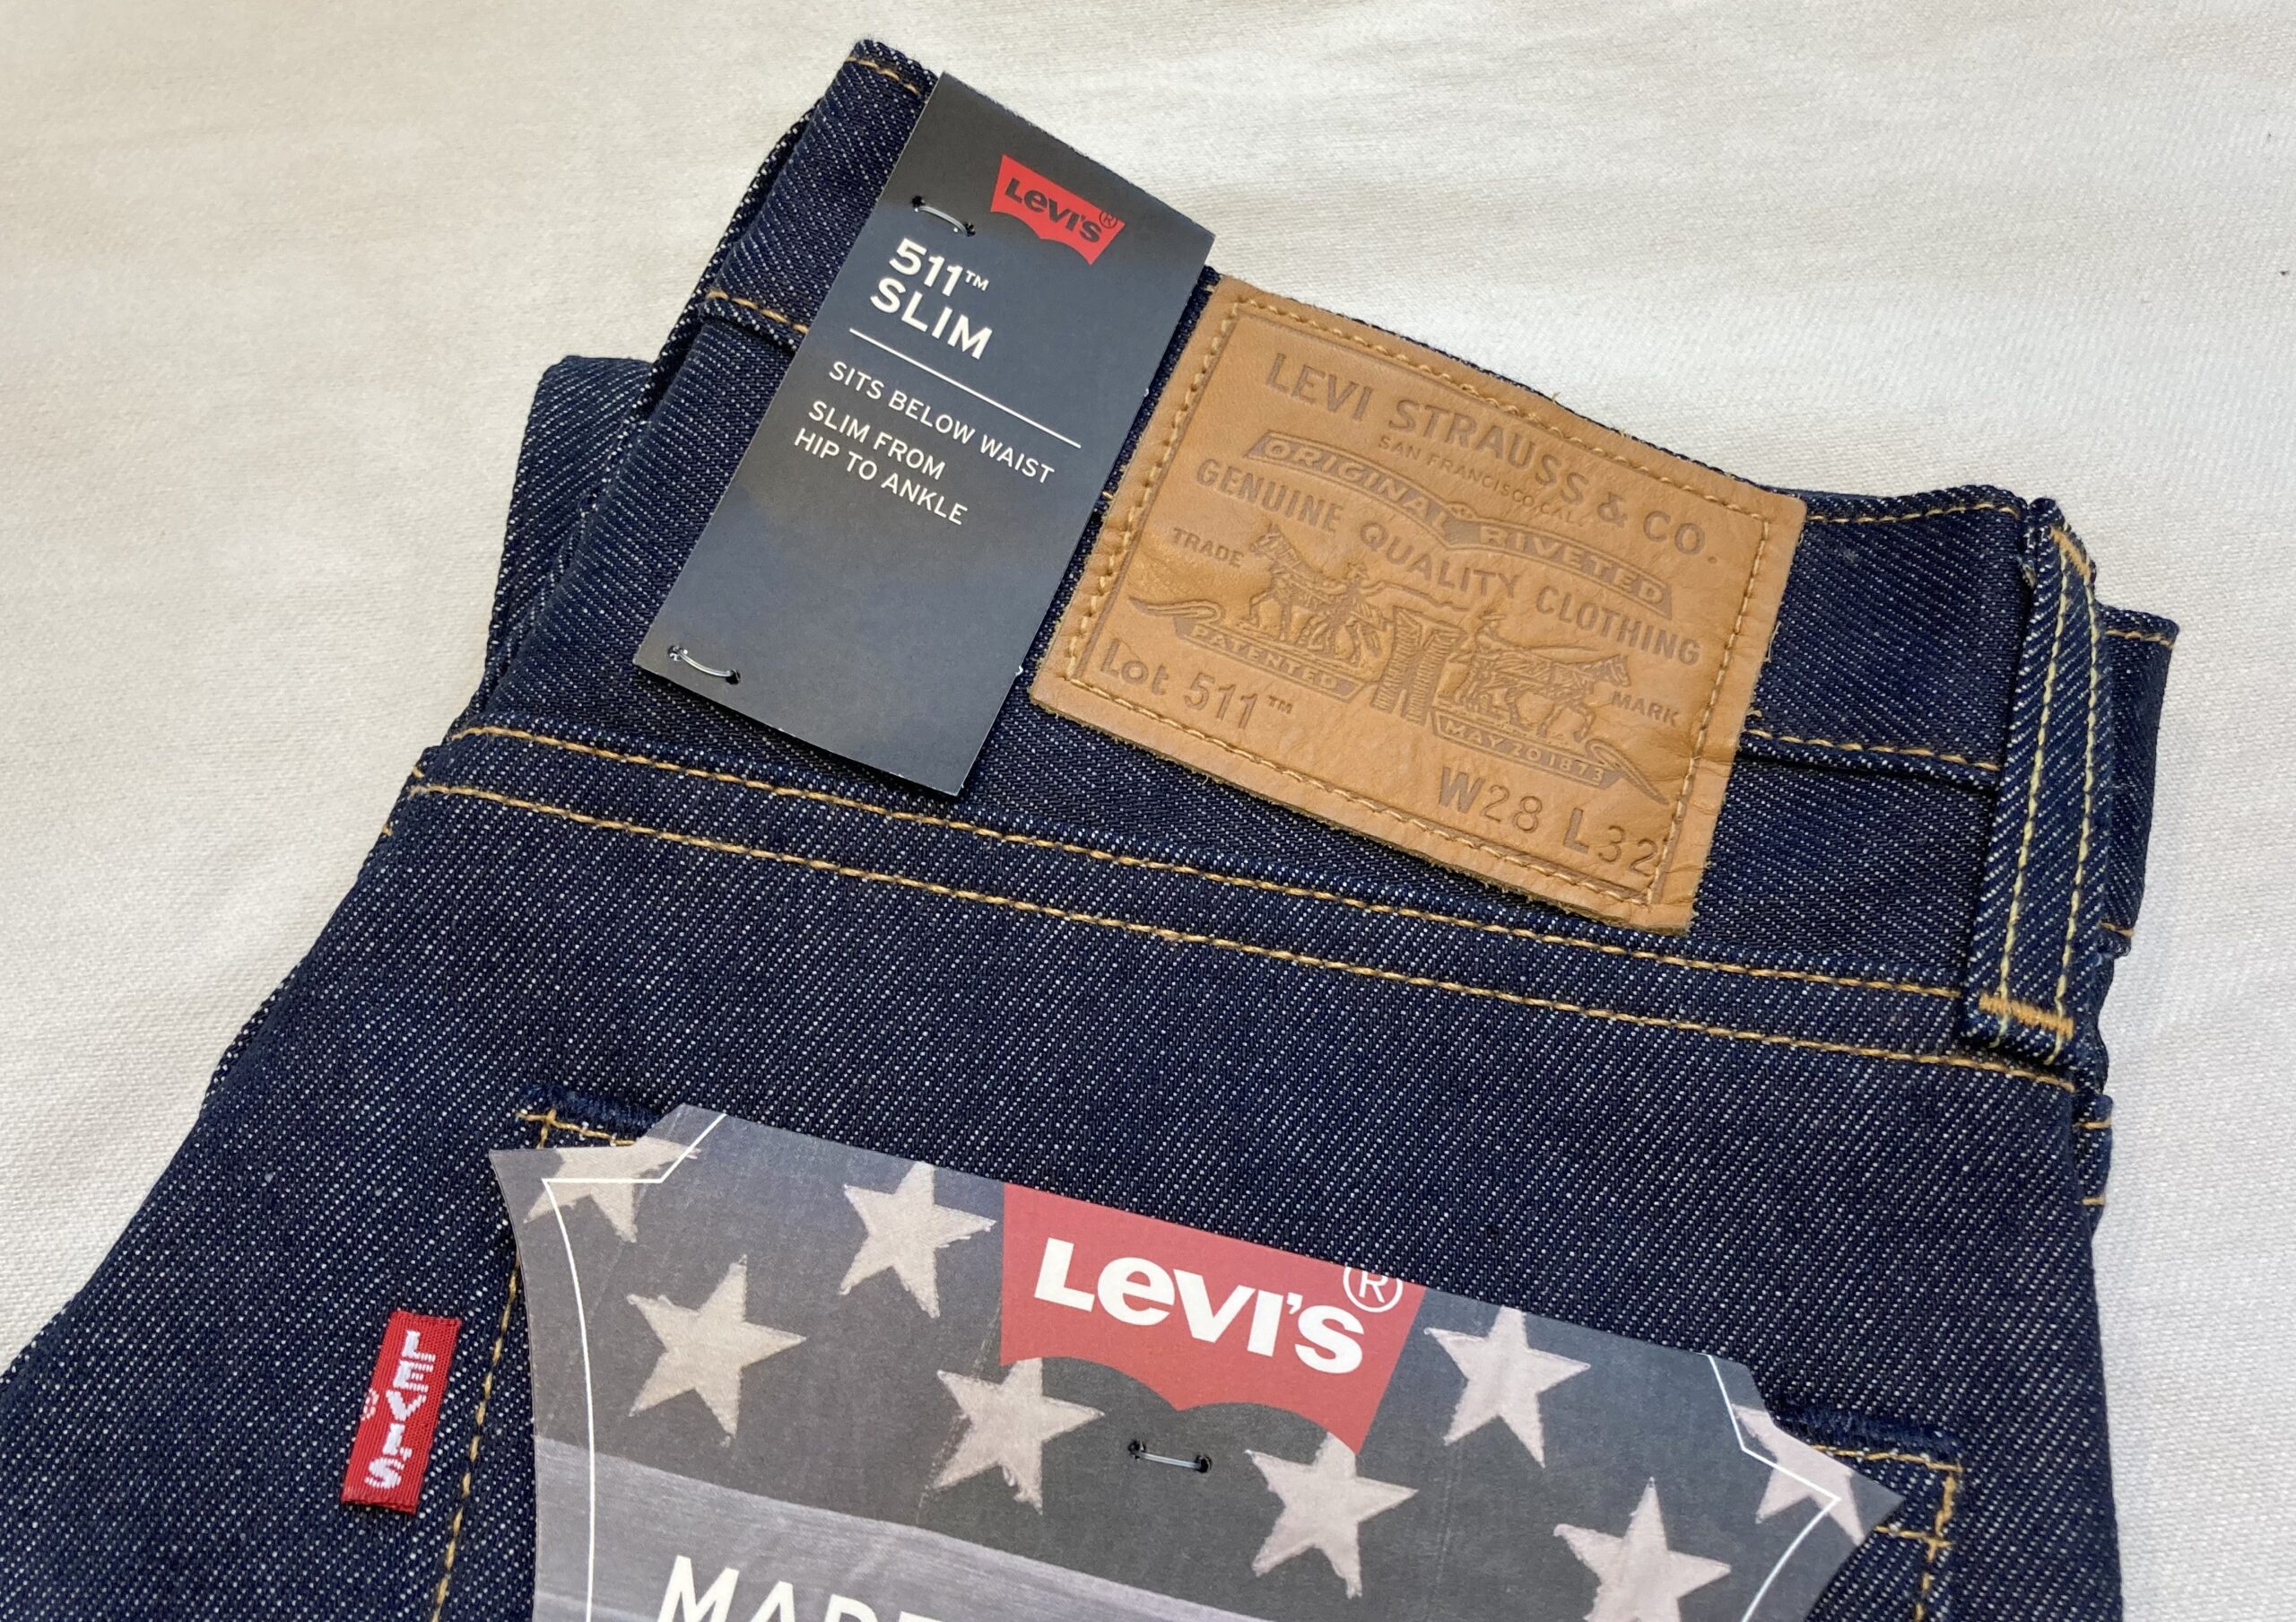 LEVI'S 511 SELVAGE/ MADE IN USA | LINK｜福岡市大名にあるセレクト 